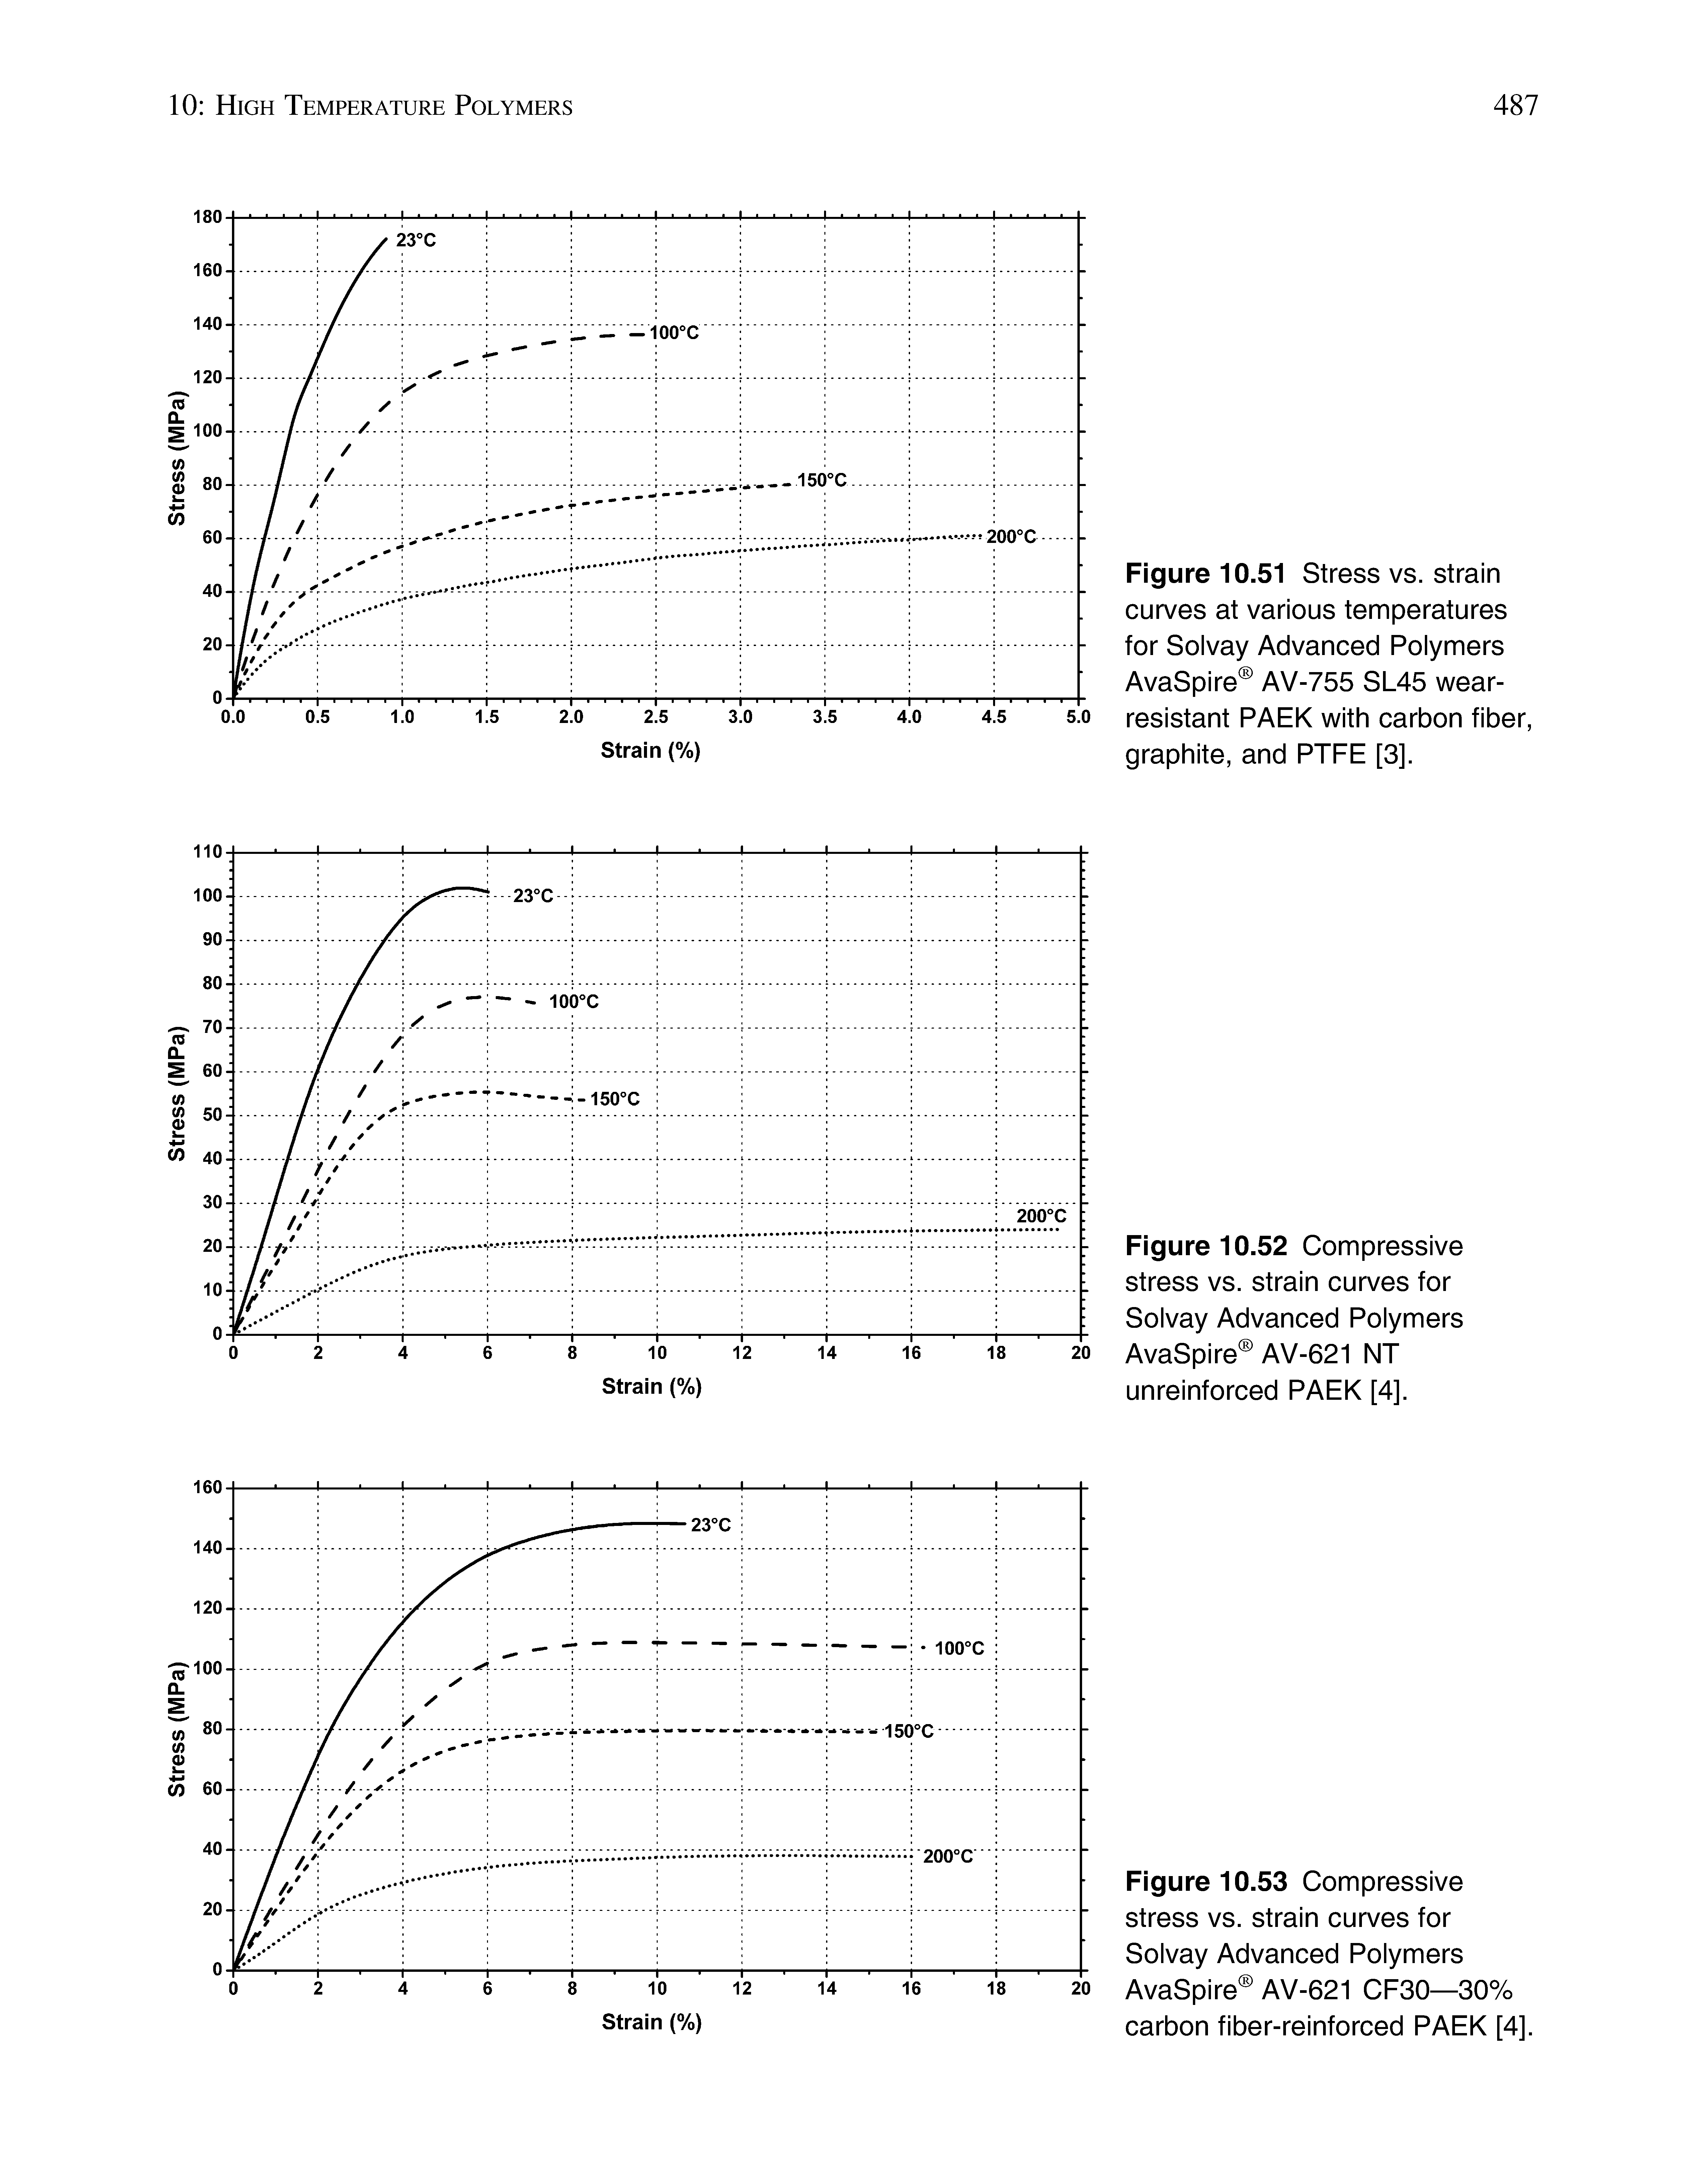 Figure 10.51 Stress vs. strain curves at various temperatures for Solvay Advanced Polymers AvaSpire AV-755 SL45 wear-resistant PAEK with carbon fiber, graphite, and PTFE [3].